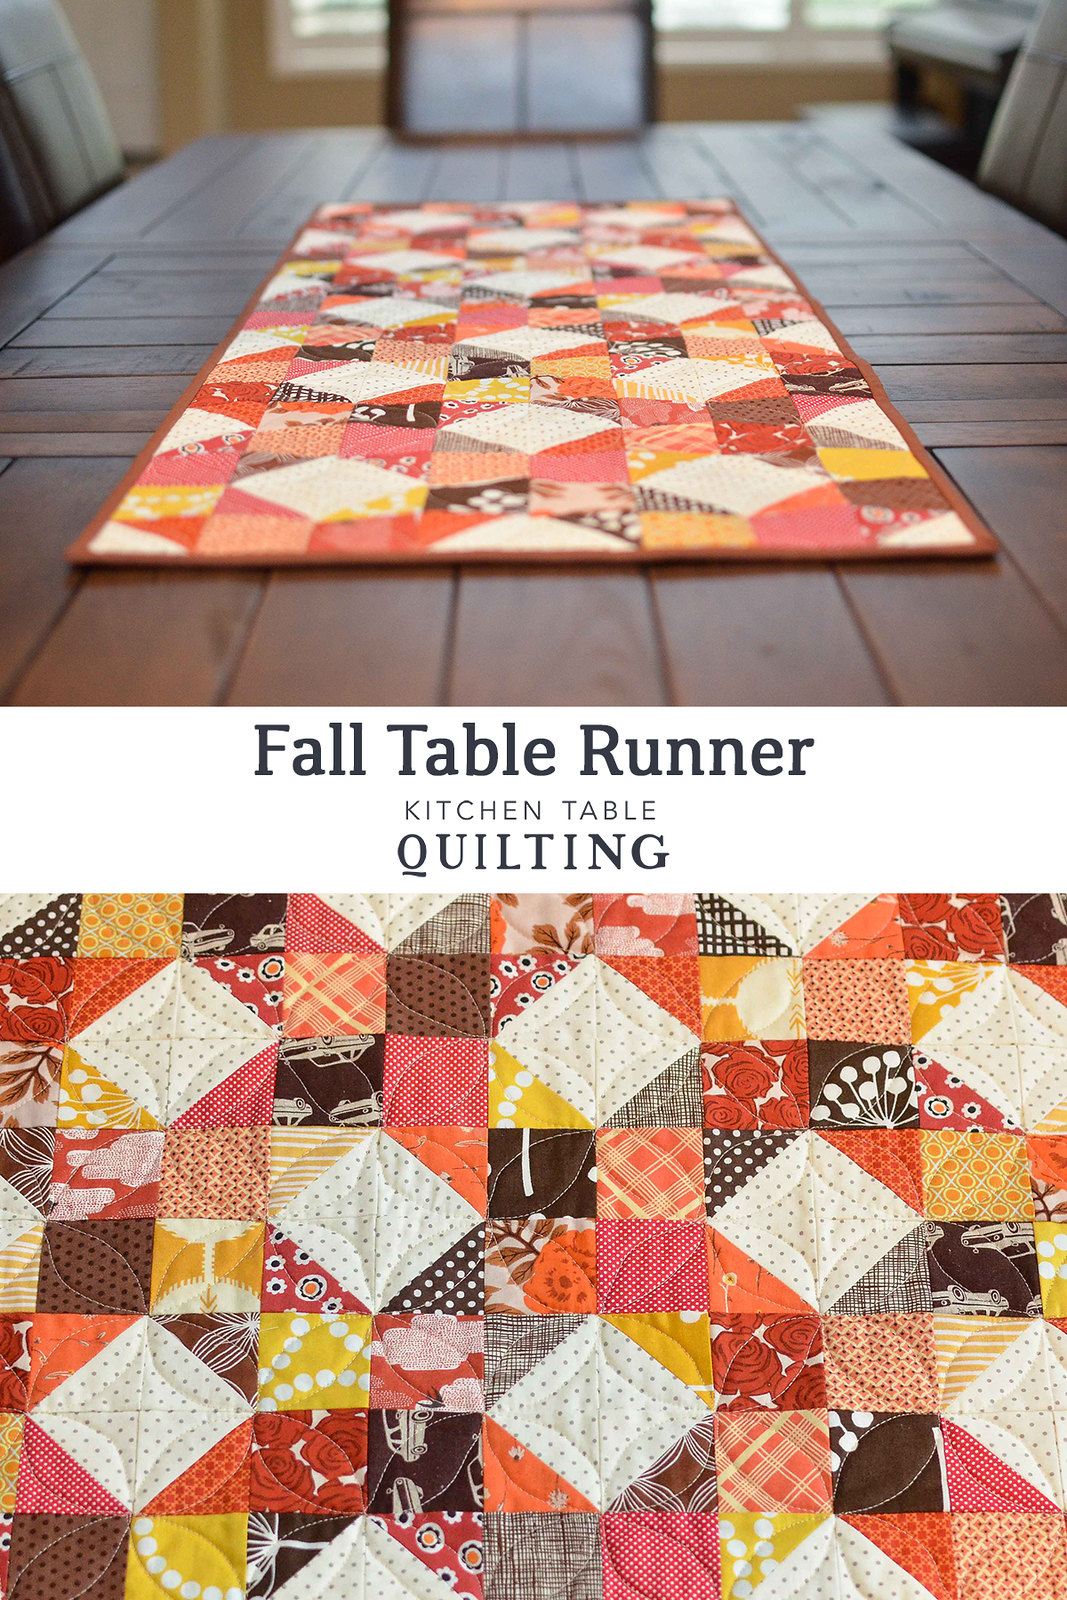 Fall Table Runner - Kitchen Table Quilting